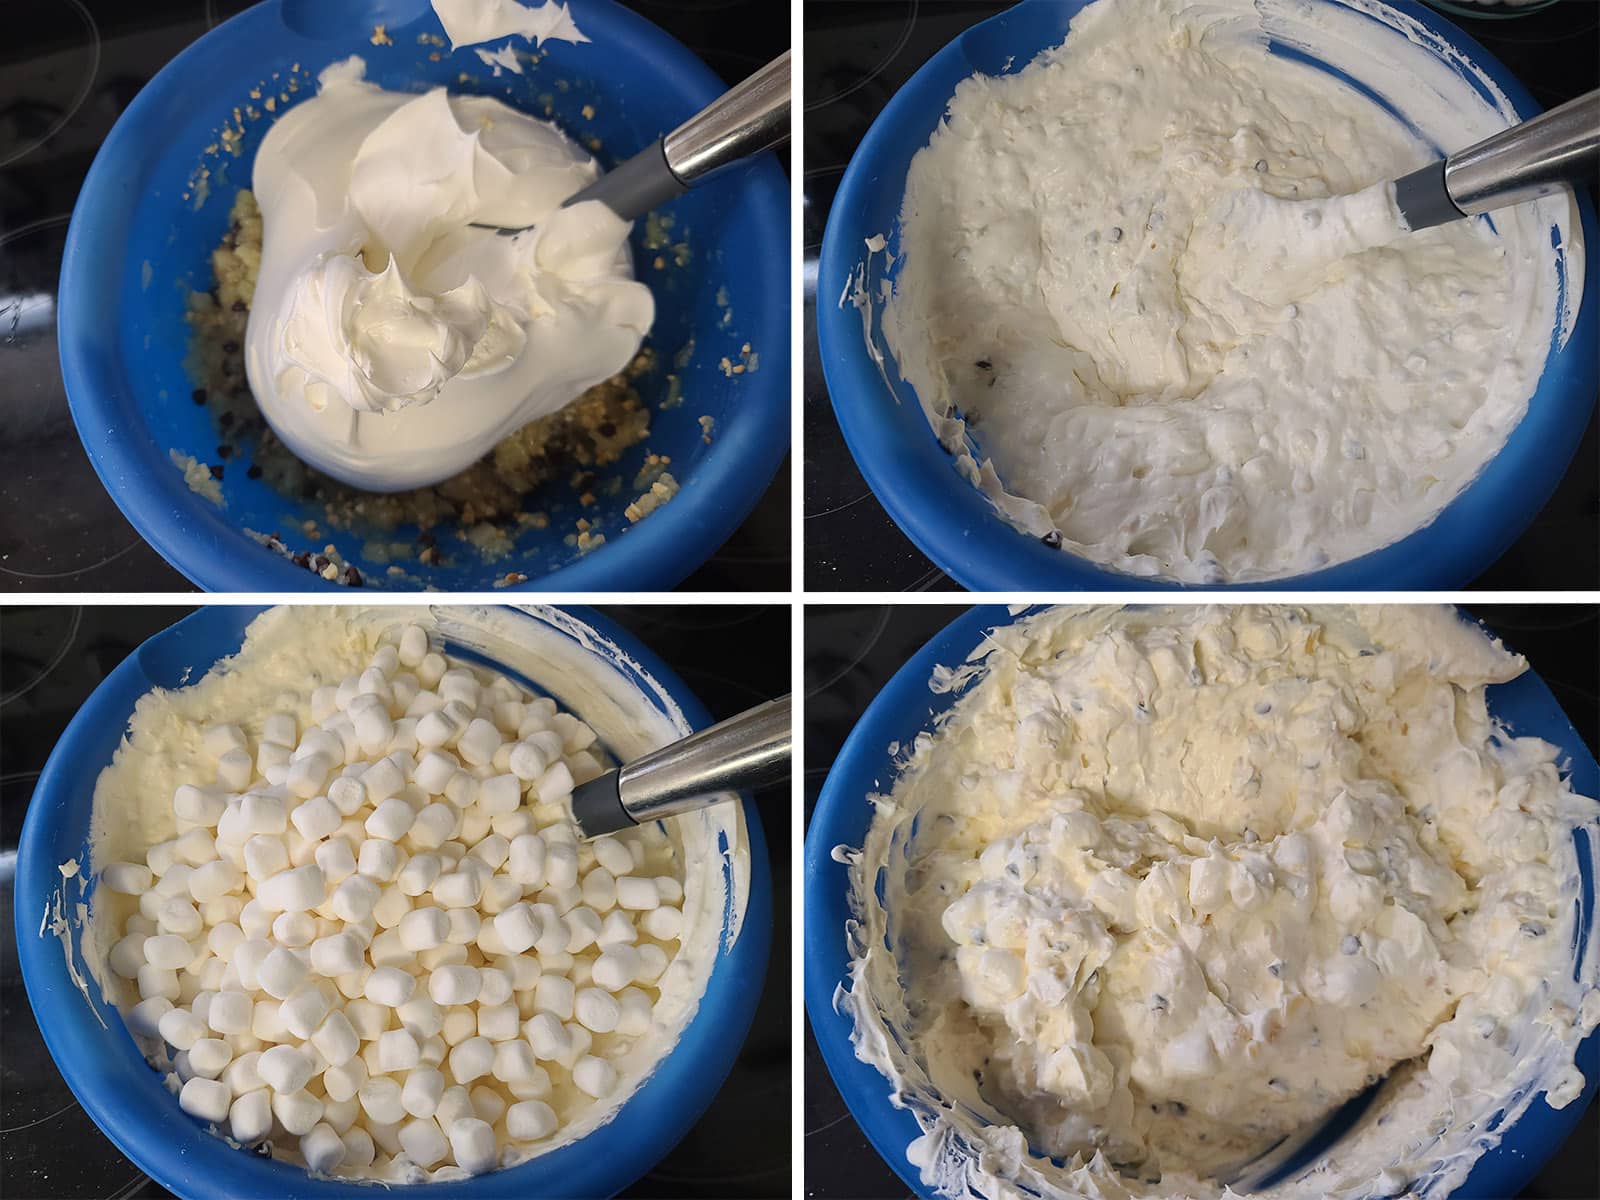 A 4 part image showing the Cool Whip and then marshmallows being mixed into the marshmallow pudding base.